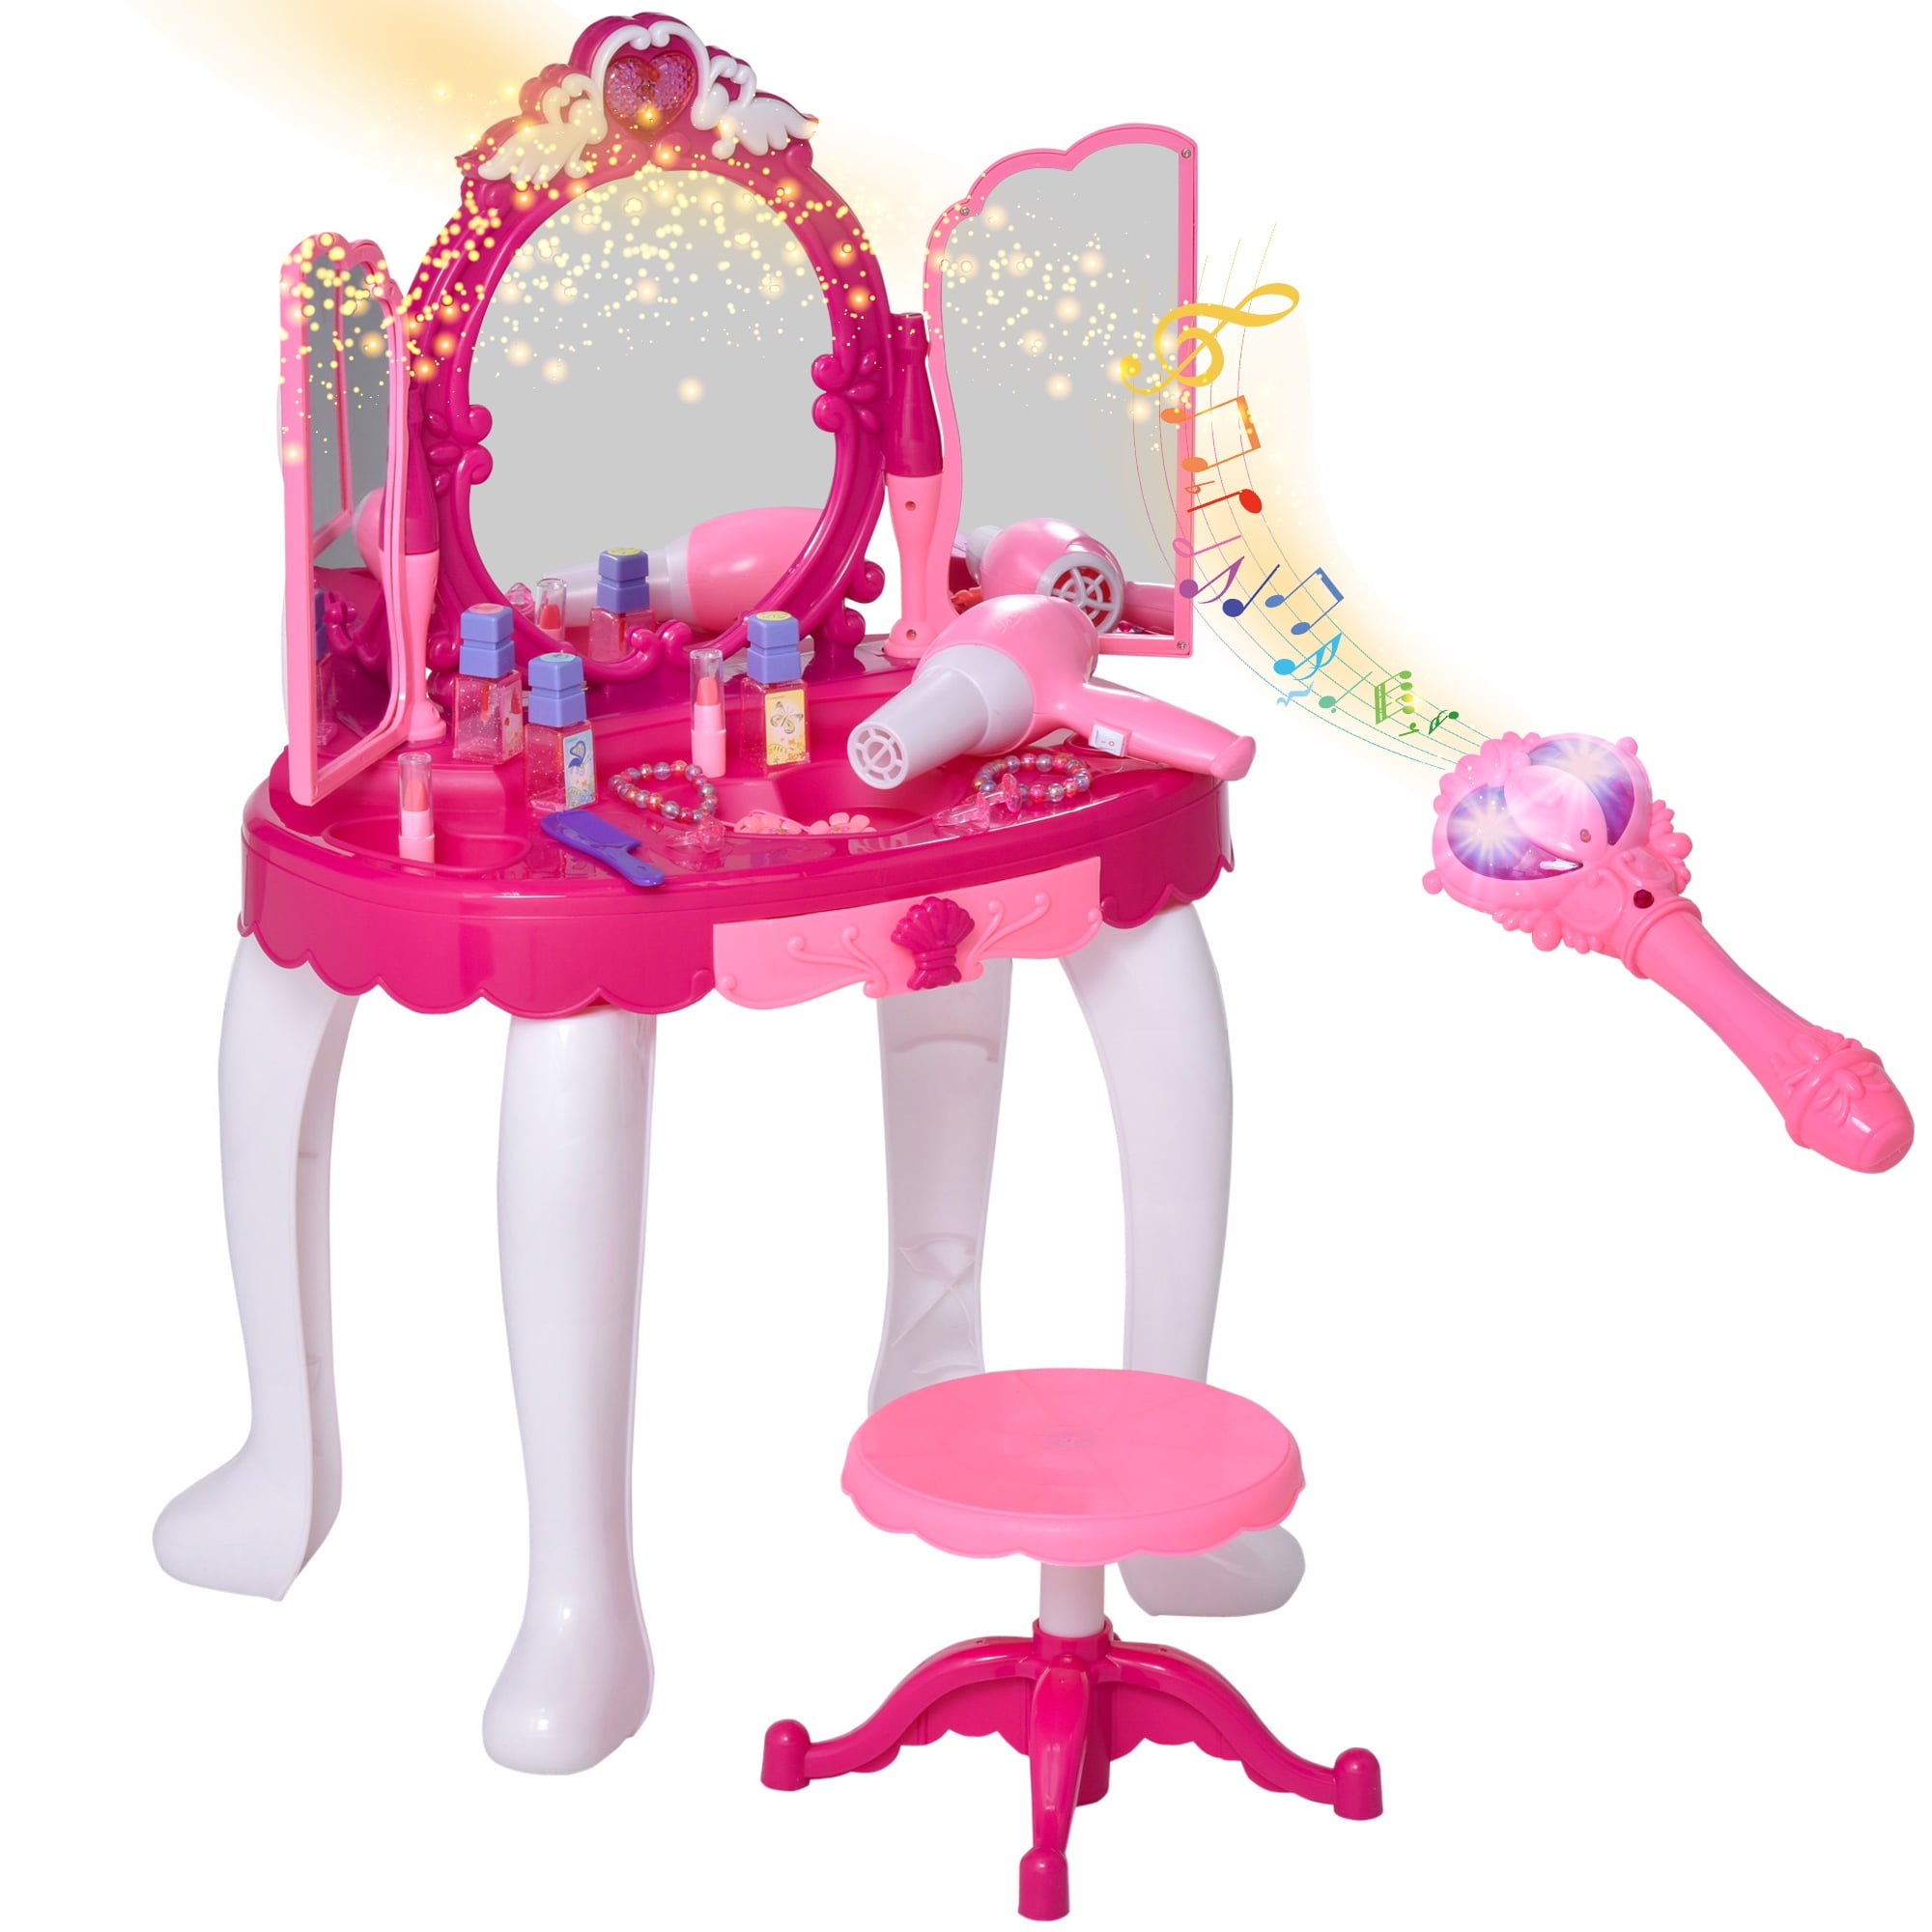 Princess Dressing Makeup Table Princess Girls Kids Vanity Table And Chair Beauty Play Set With Mirror Working Hair Dryer Pretend Princess Girls Makeup Accessories Pink Birthday Gift Walmart Com Walmart Com Same day delivery 7 days a week £3.95, or fast store collection. princess dressing makeup table princess girls kids vanity table and chair beauty play set with mirror working hair dryer pretend princess girls makeup